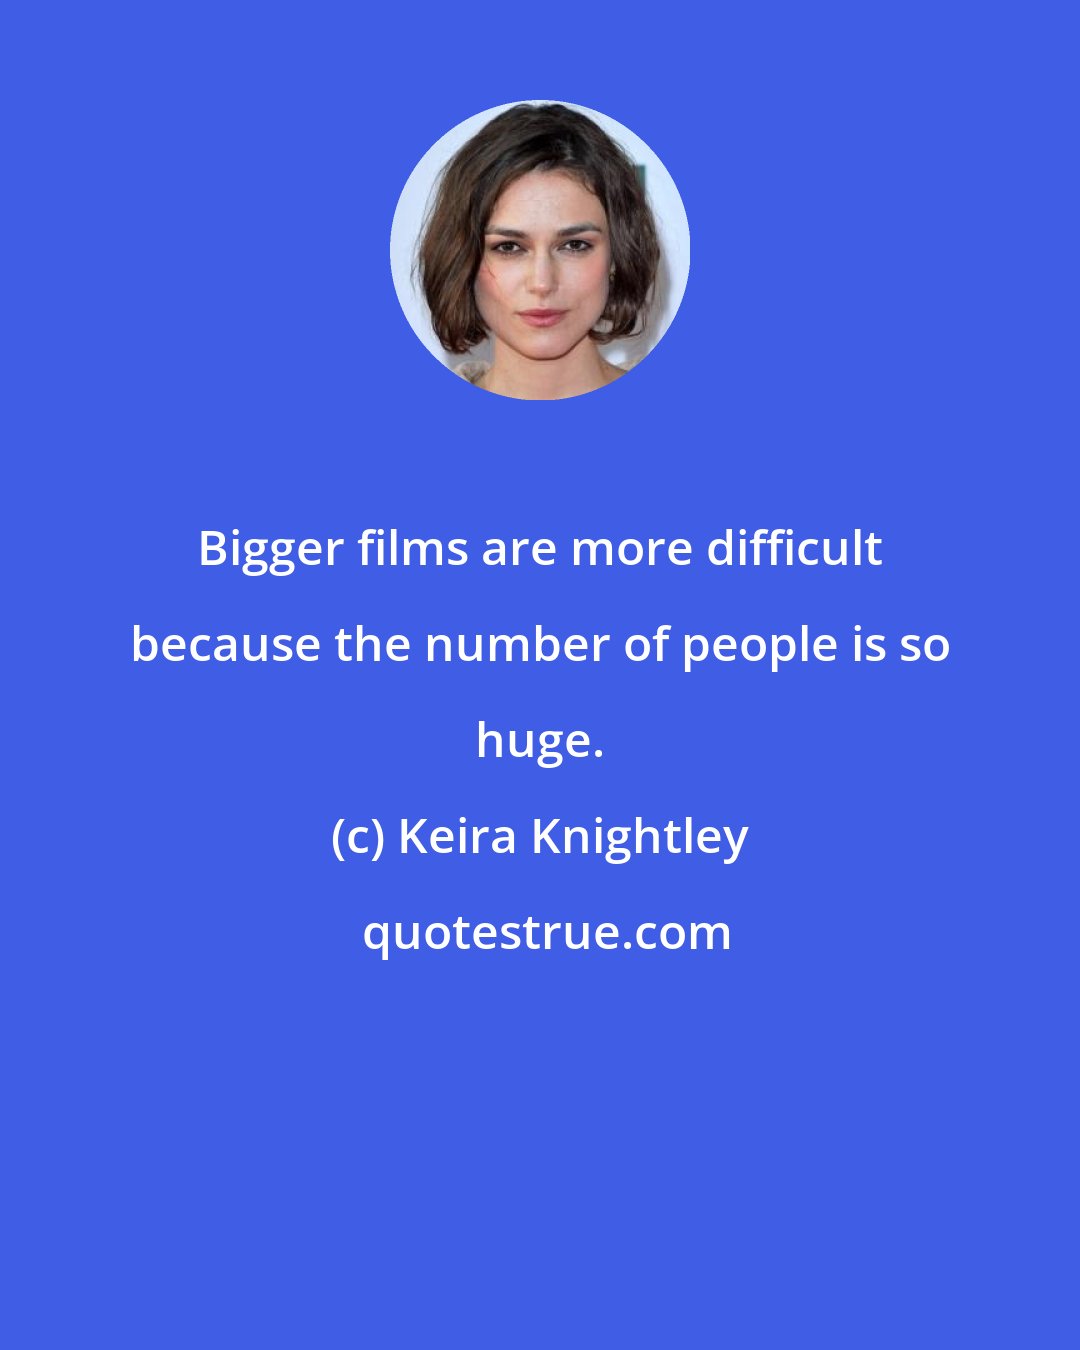 Keira Knightley: Bigger films are more difficult because the number of people is so huge.